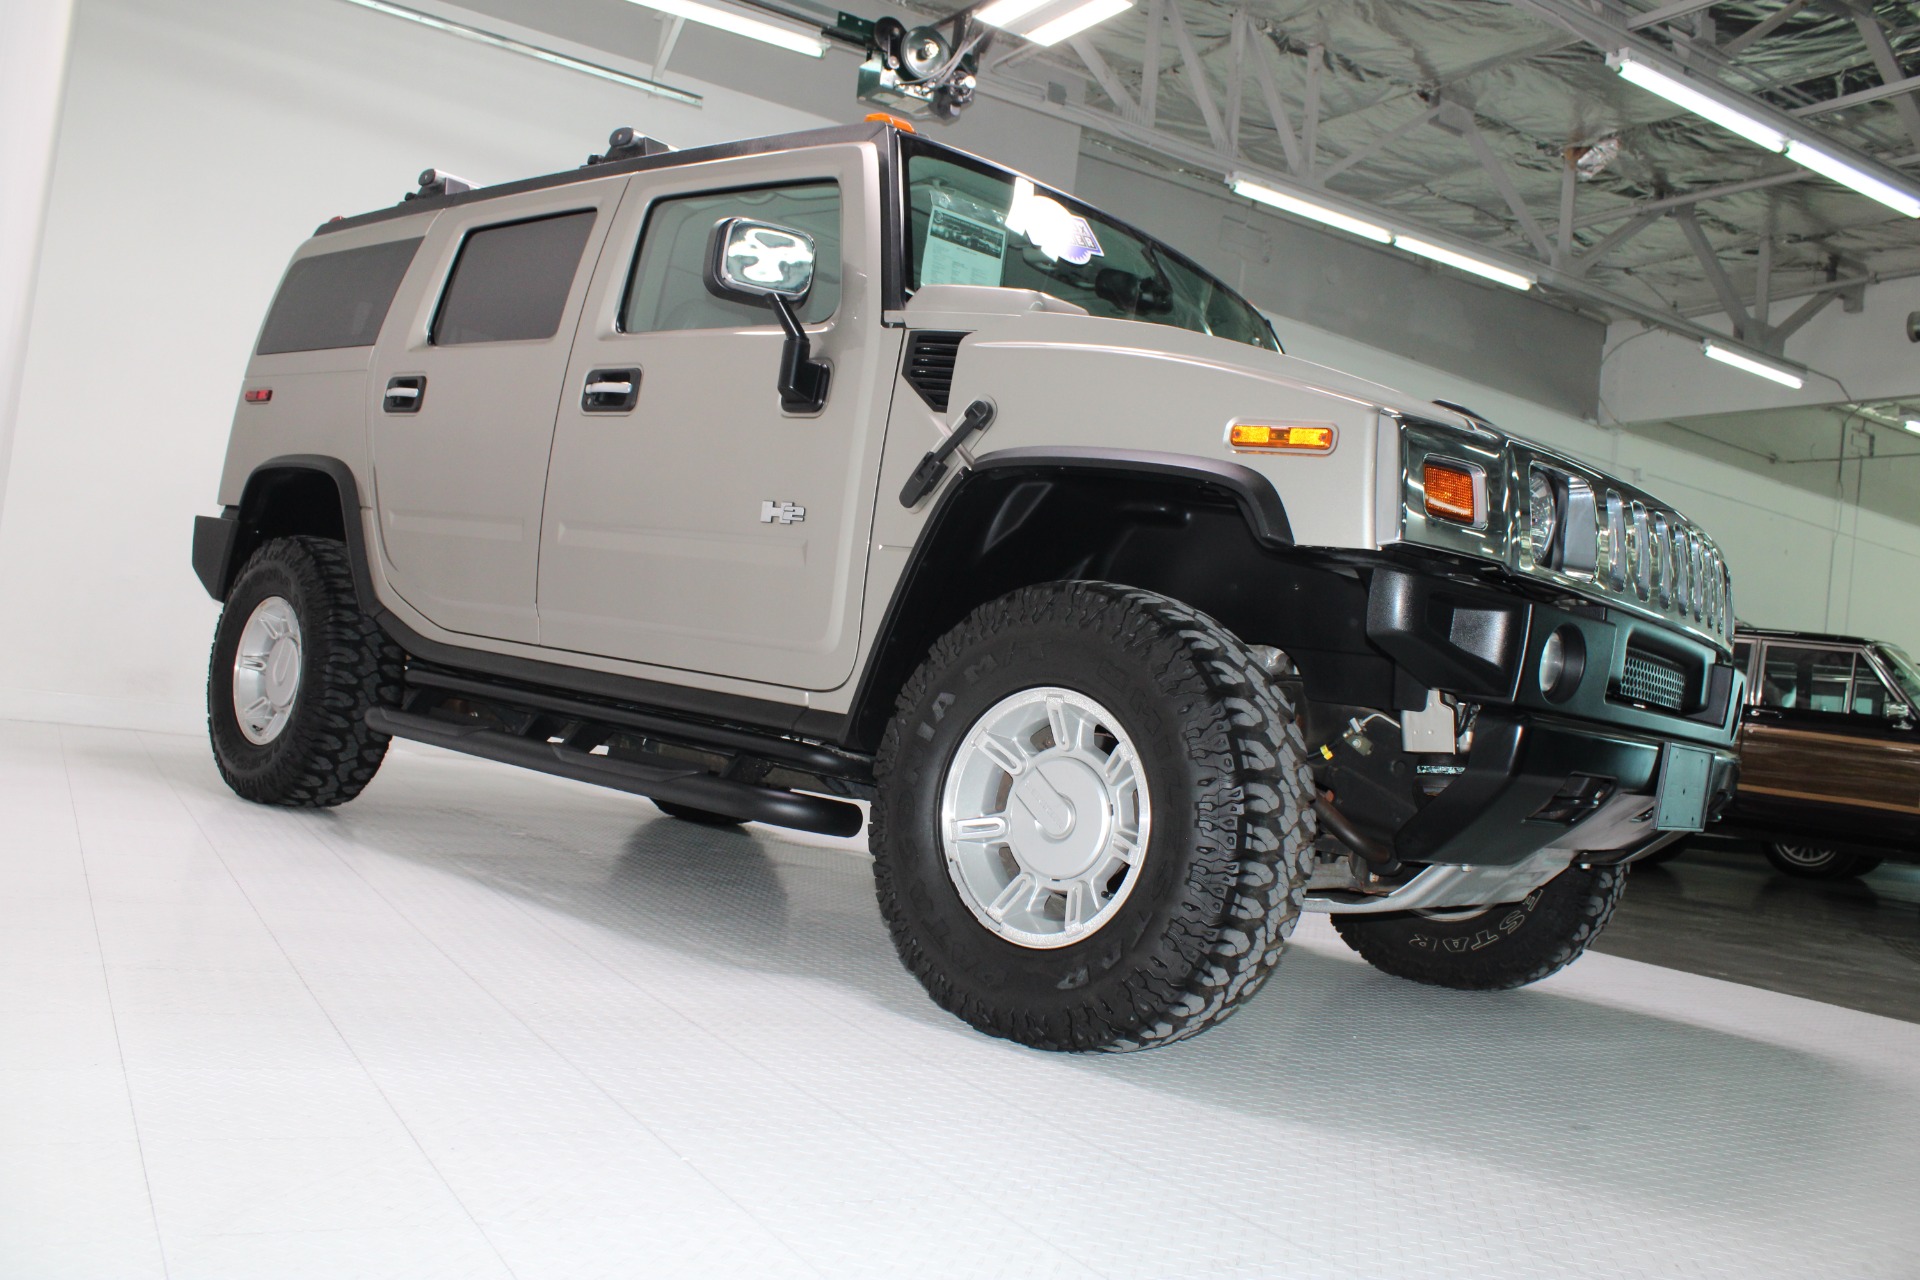 Used-2003-HUMMER-H2-SUV-Chevrolet